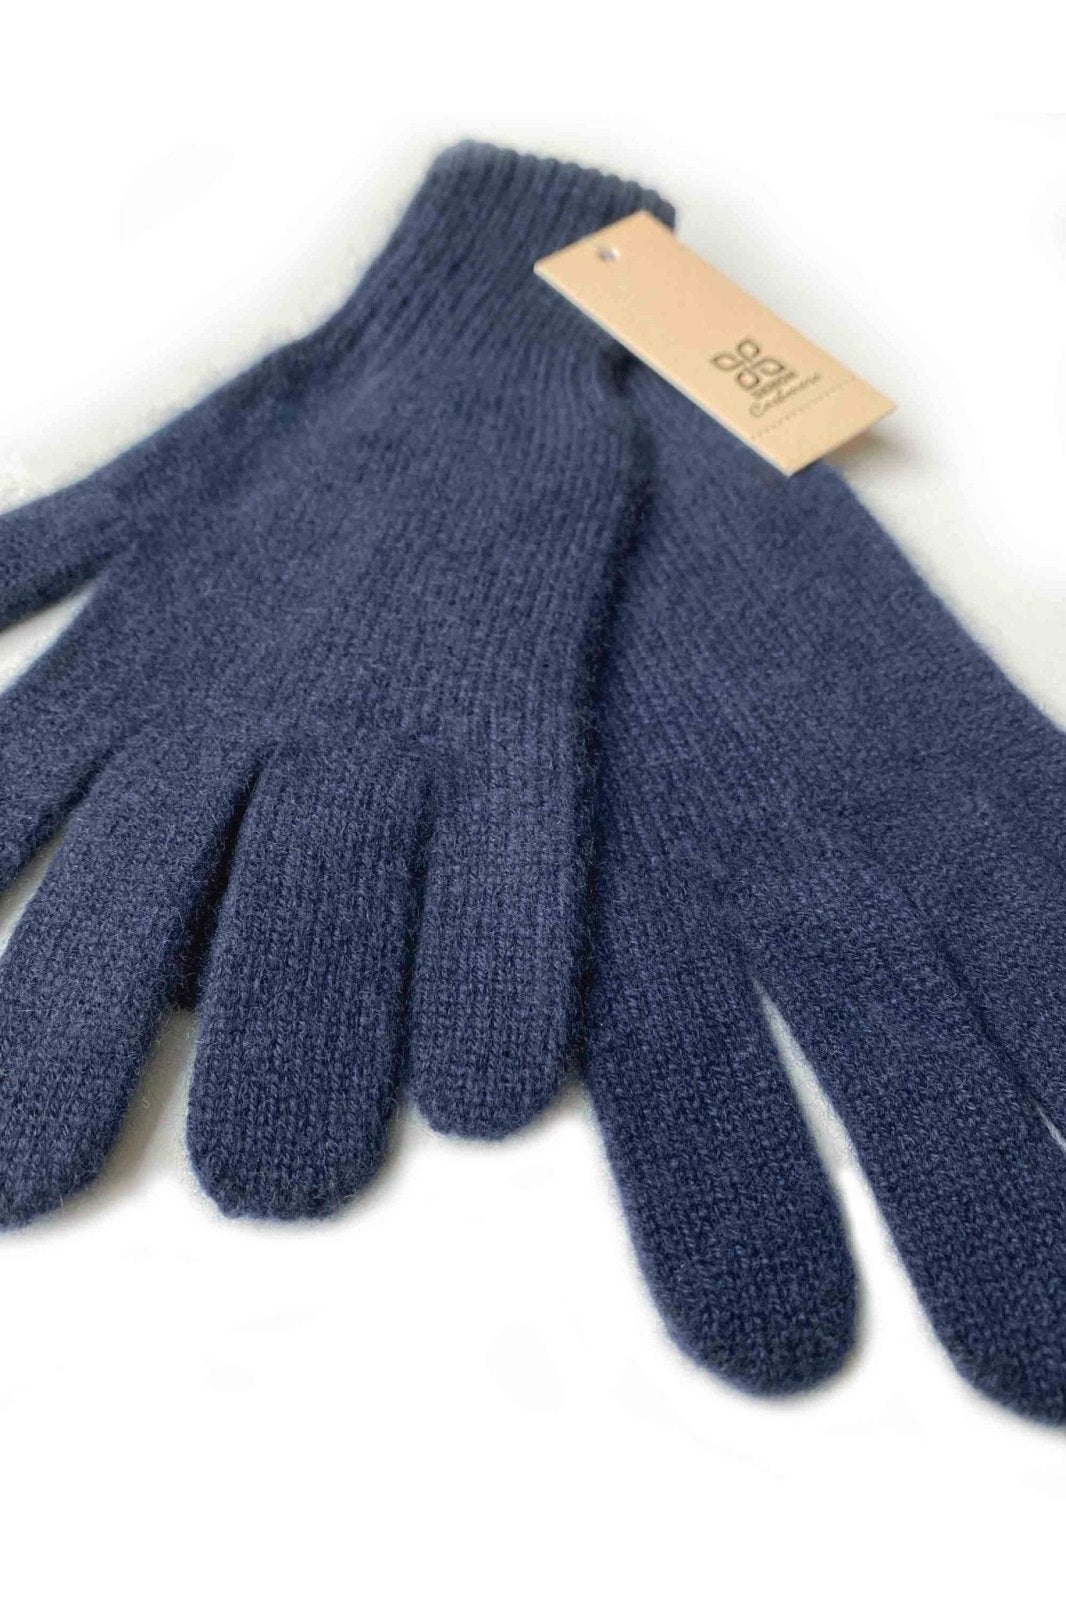 Bundle offer for women's cashmere hat, scarf and gloves in Dark navy blue - SEMON Cashmere